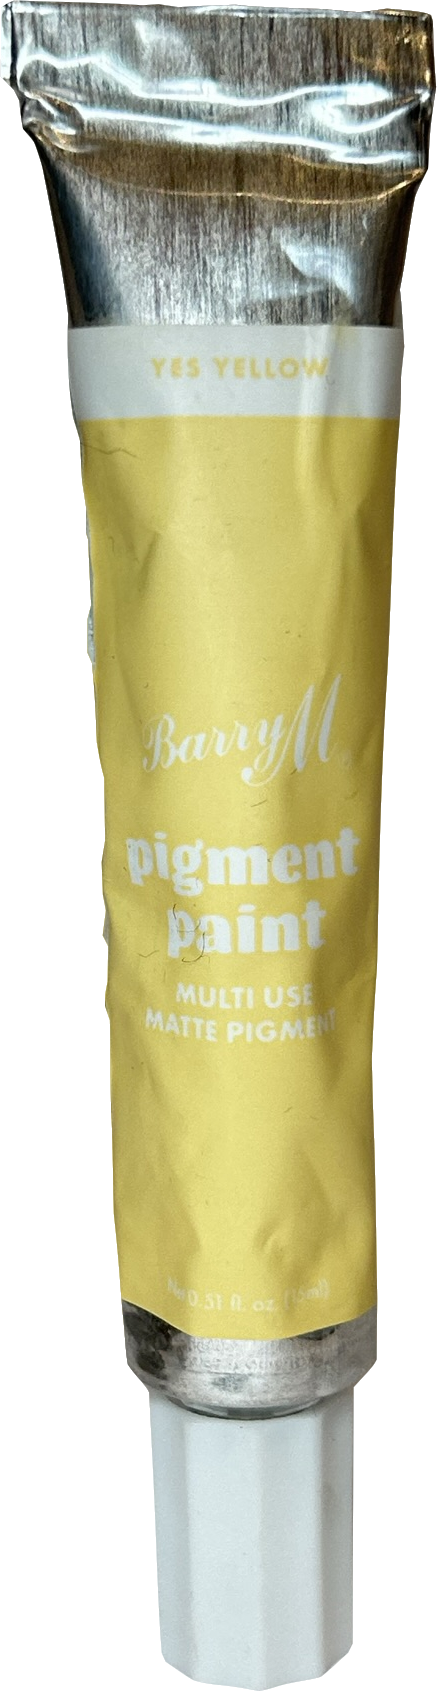 Barry M Face & Body Pigment Paint Yes Yellow 15ml